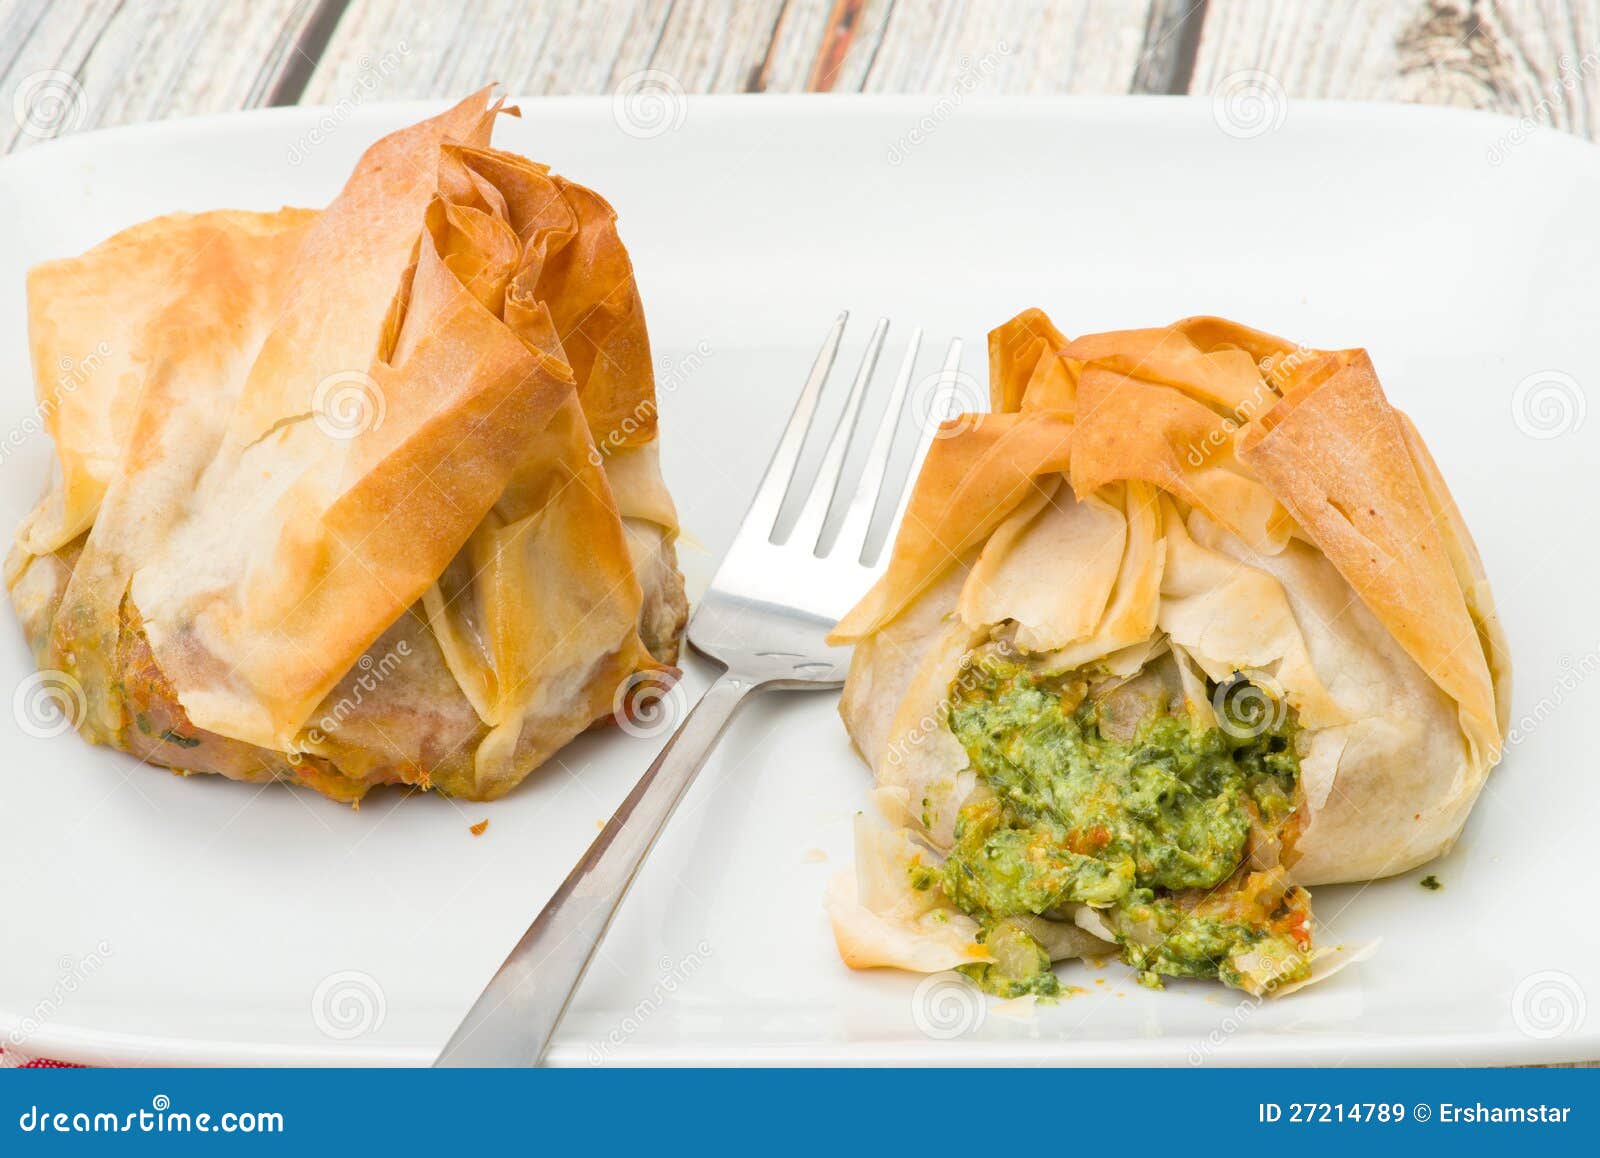 spinach and ricotta filo pastry parcels